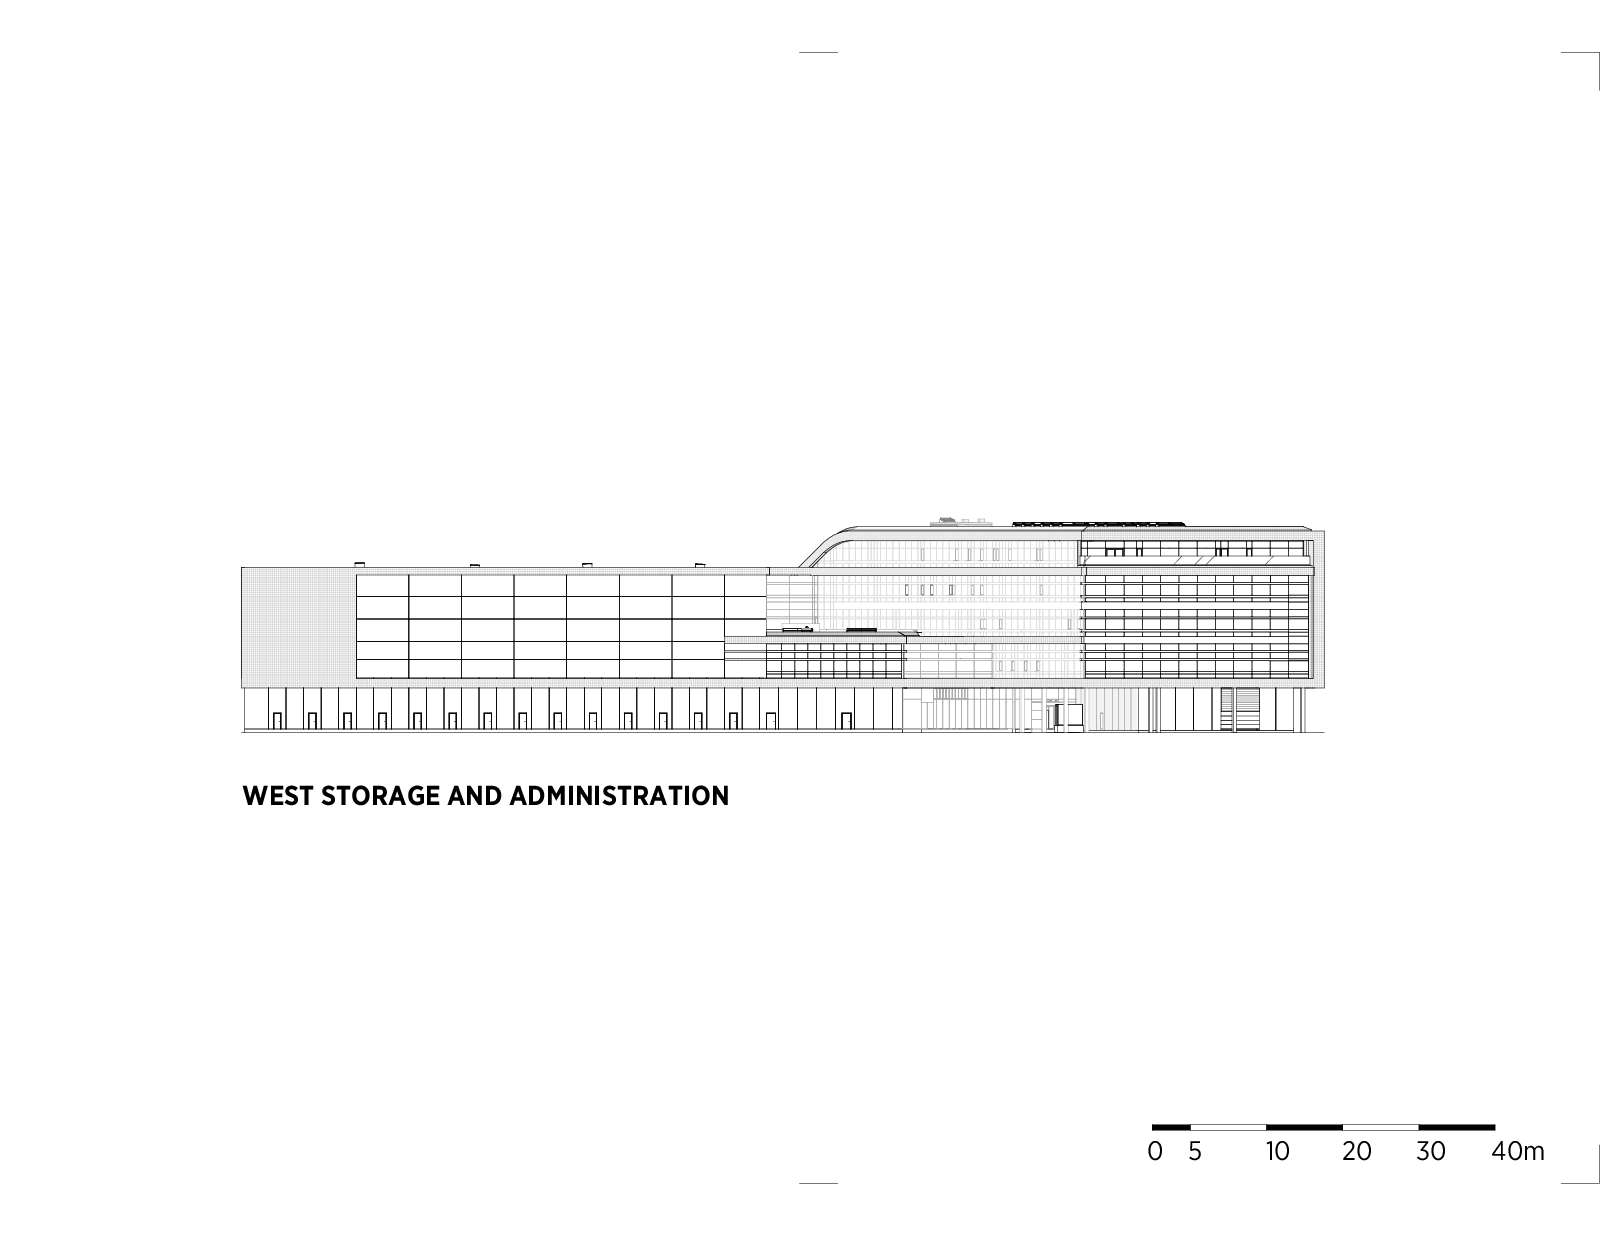 Facade West Storage and Administration Mascot International C.F. Møller Architects